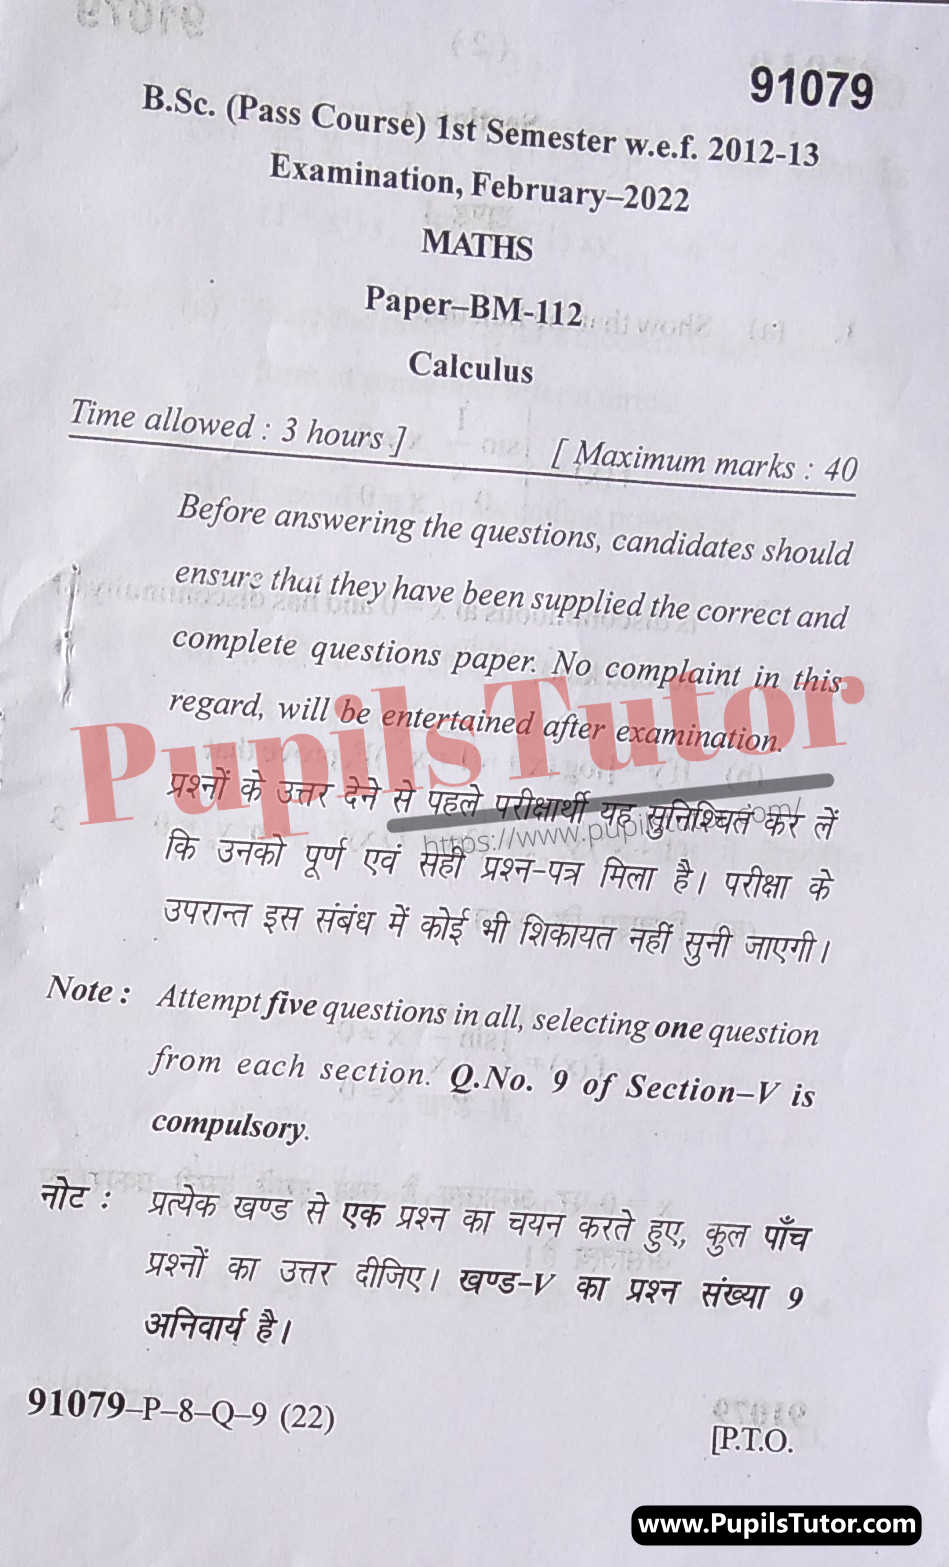 MDU (Maharshi Dayanand University, Rohtak Haryana) BSc Maths Pass Course First Semester Previous Year Calculus Question Paper For February, 2022 Exam (Question Paper Page 1) - pupilstutor.com